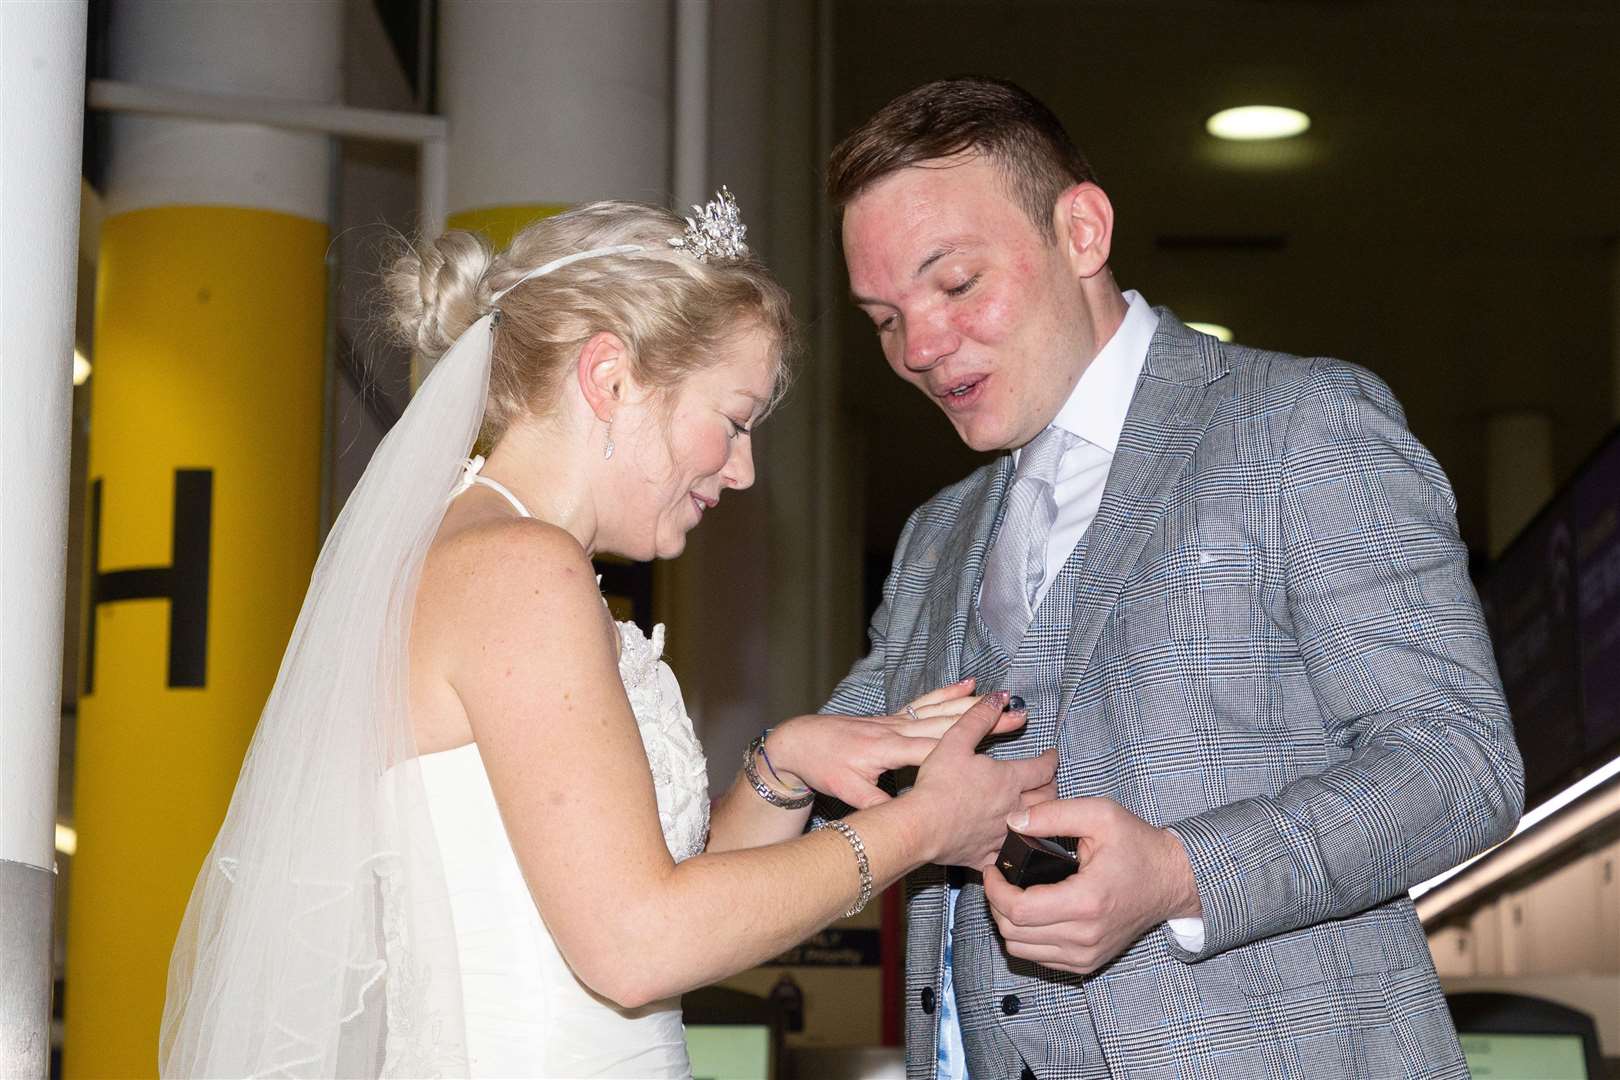 Sarah Elliott, 34, and Paul Edwards, 36, who met on a dating app on December 15 and immediately married in Vegas are now looking to divorce. Picture: SWNS